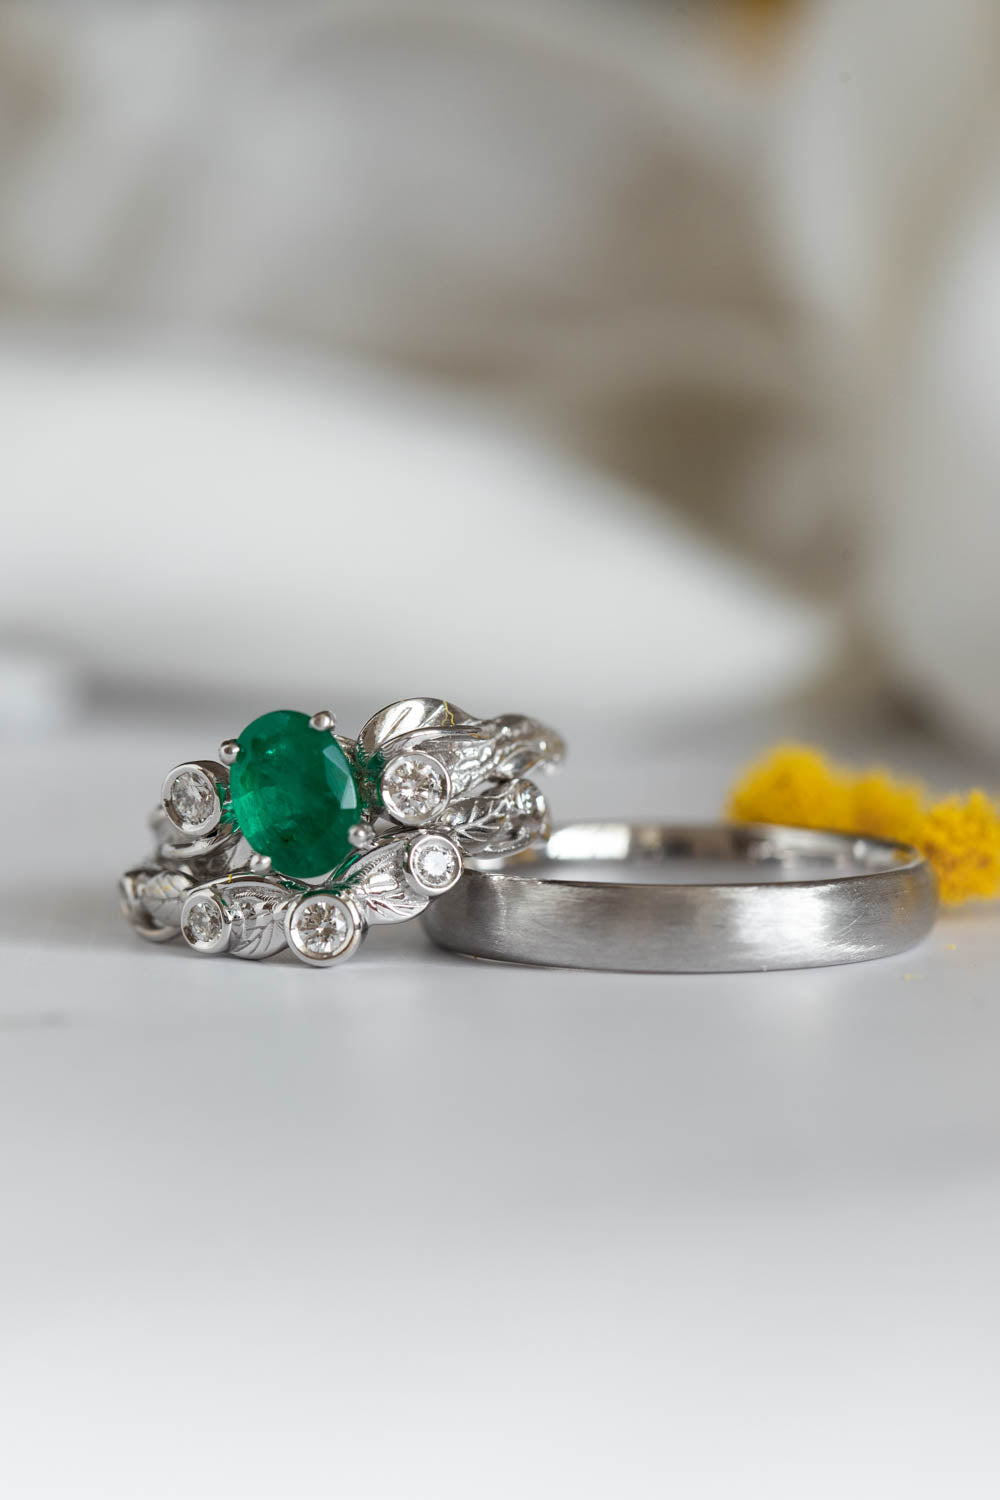 Emerald engagement ring with diamonds, white gold branch engagement ring / Arius - Eden Garden Jewelry™